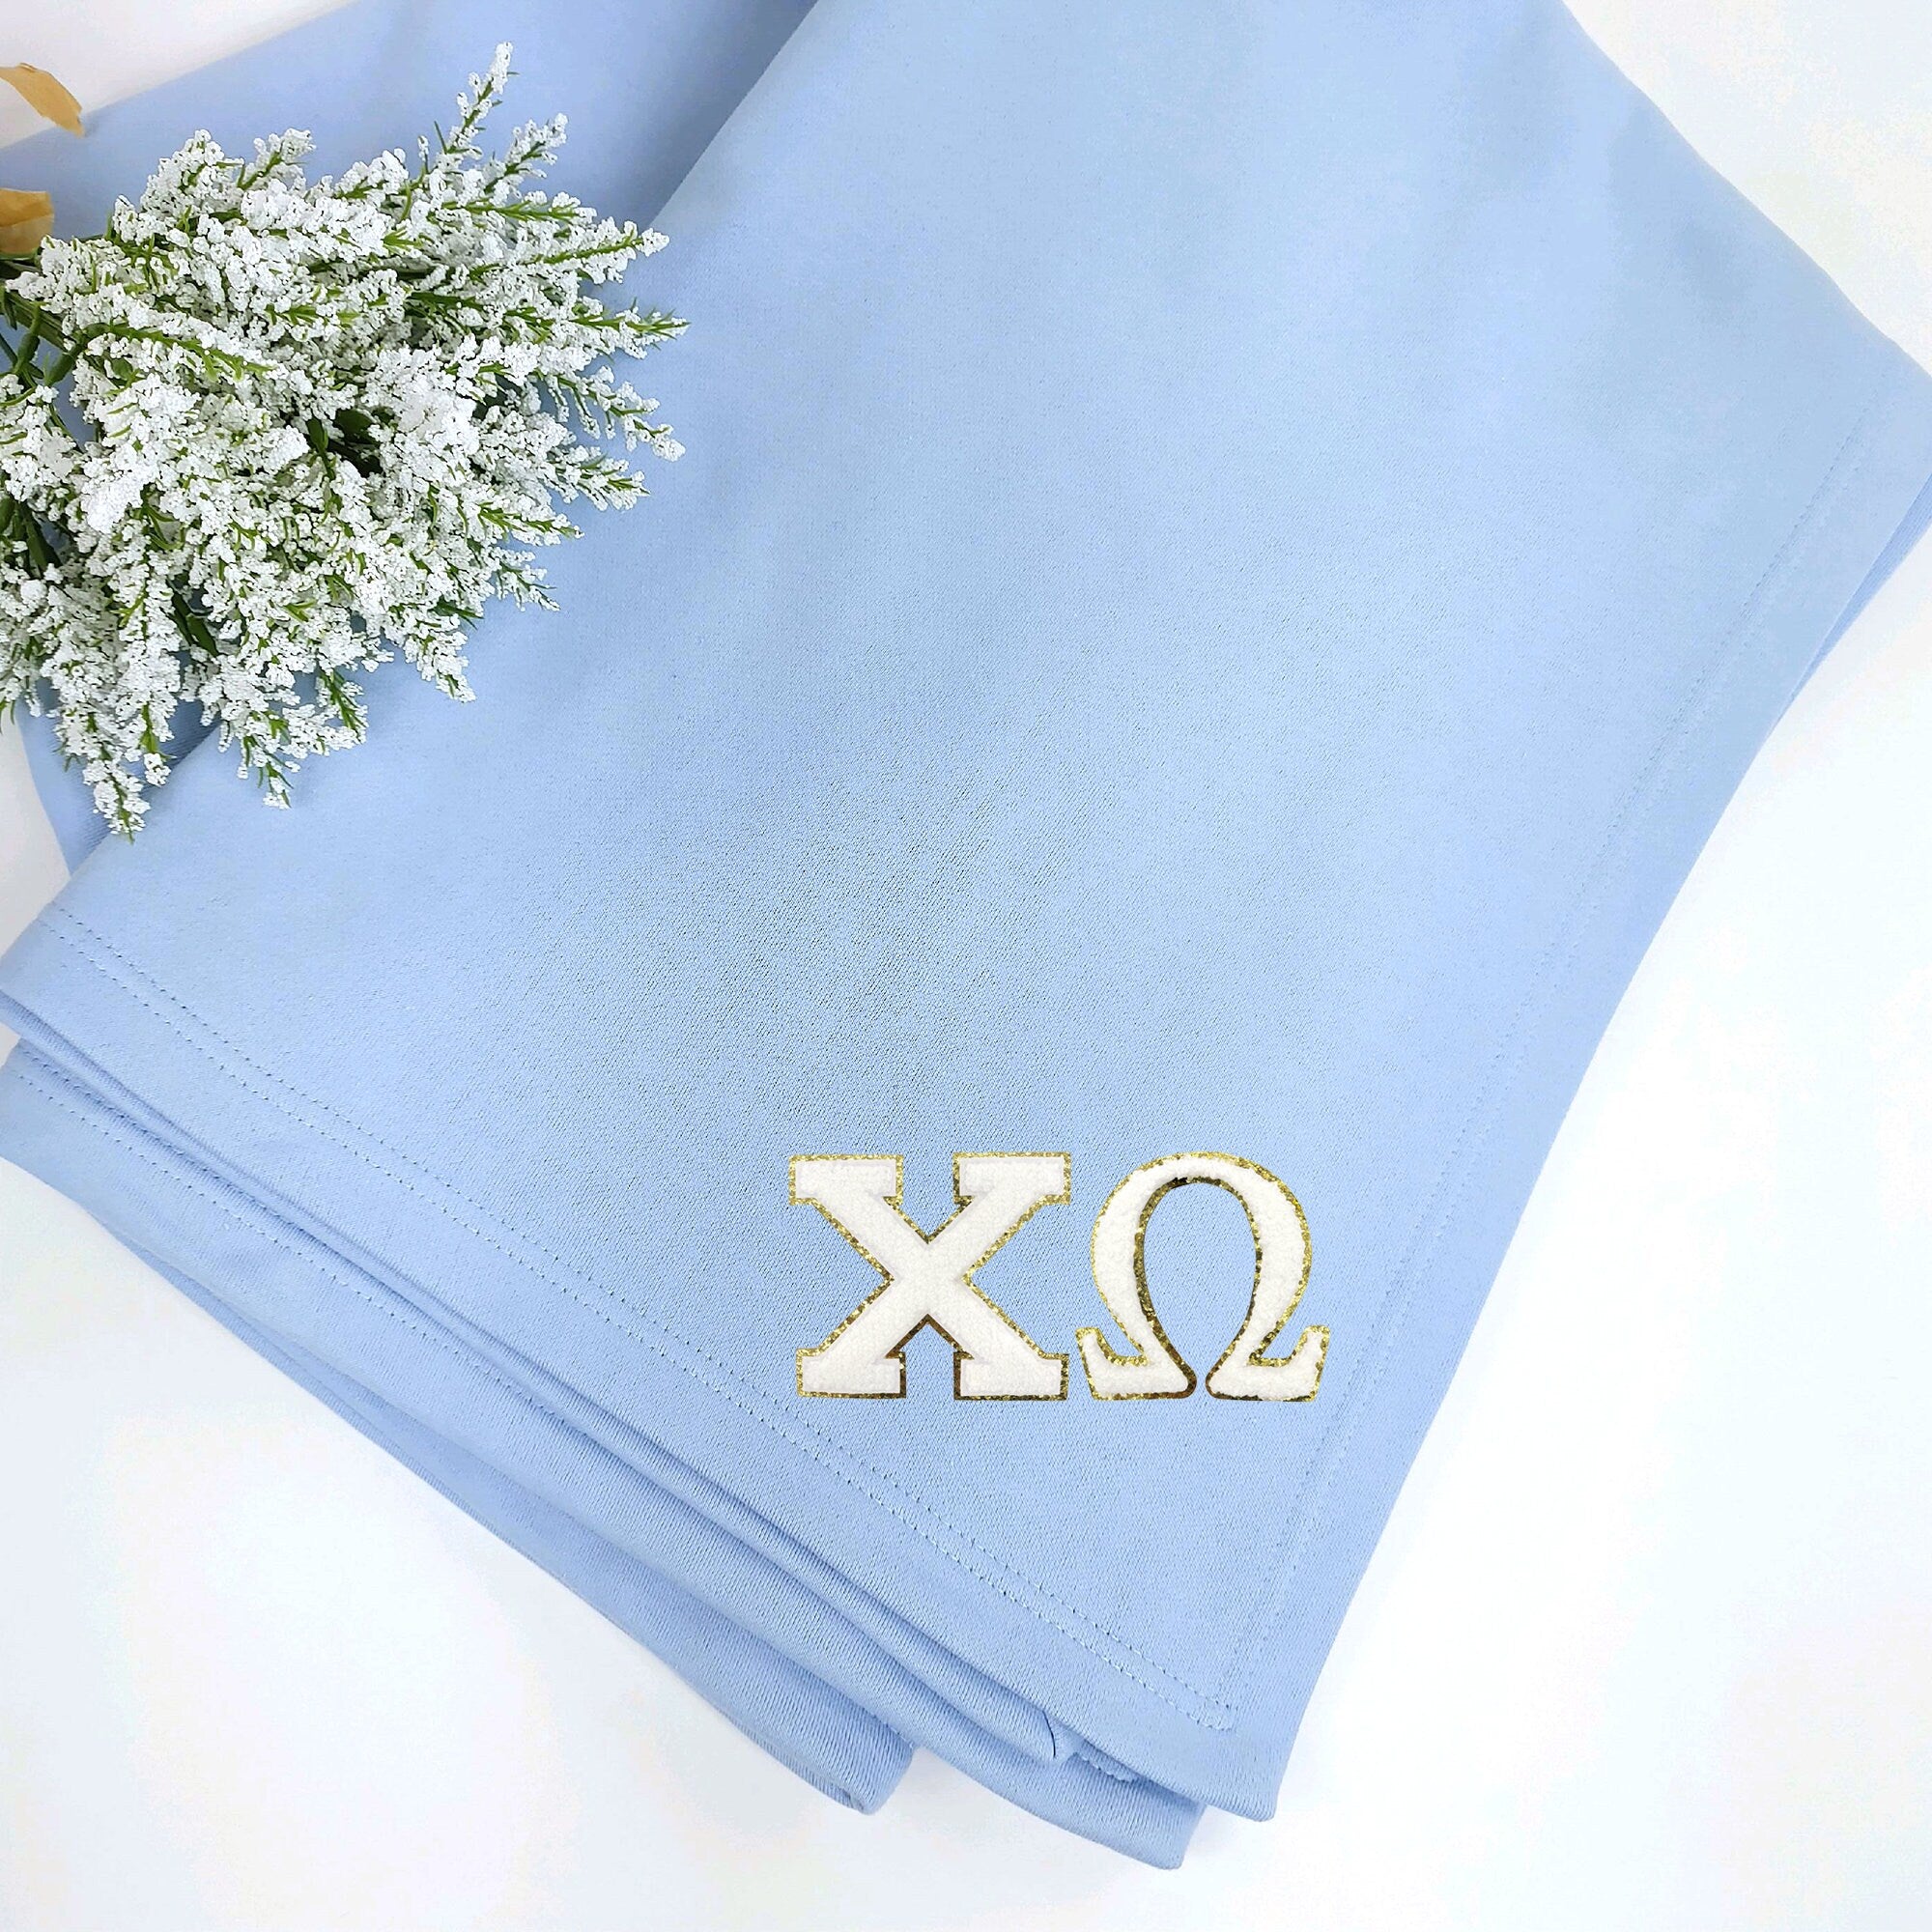 Chi Omega Patch Sweatshirt Blanket, Warm and Soft, Perfect Sorority Gift